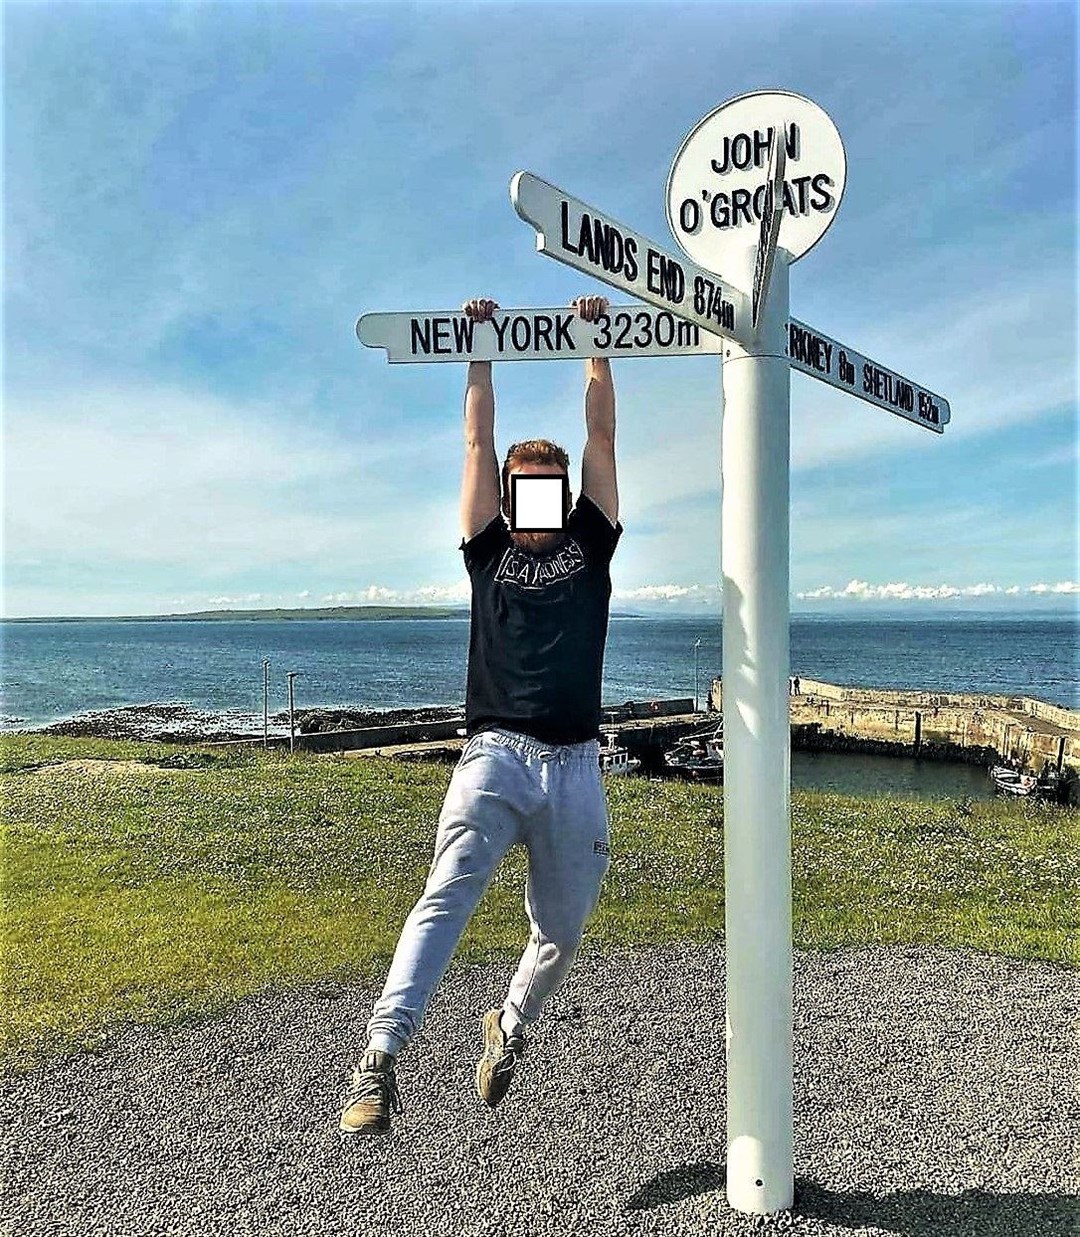 The craze had a number of Instagram users post images of themselves hanging from the famous sign at John O'Groats.